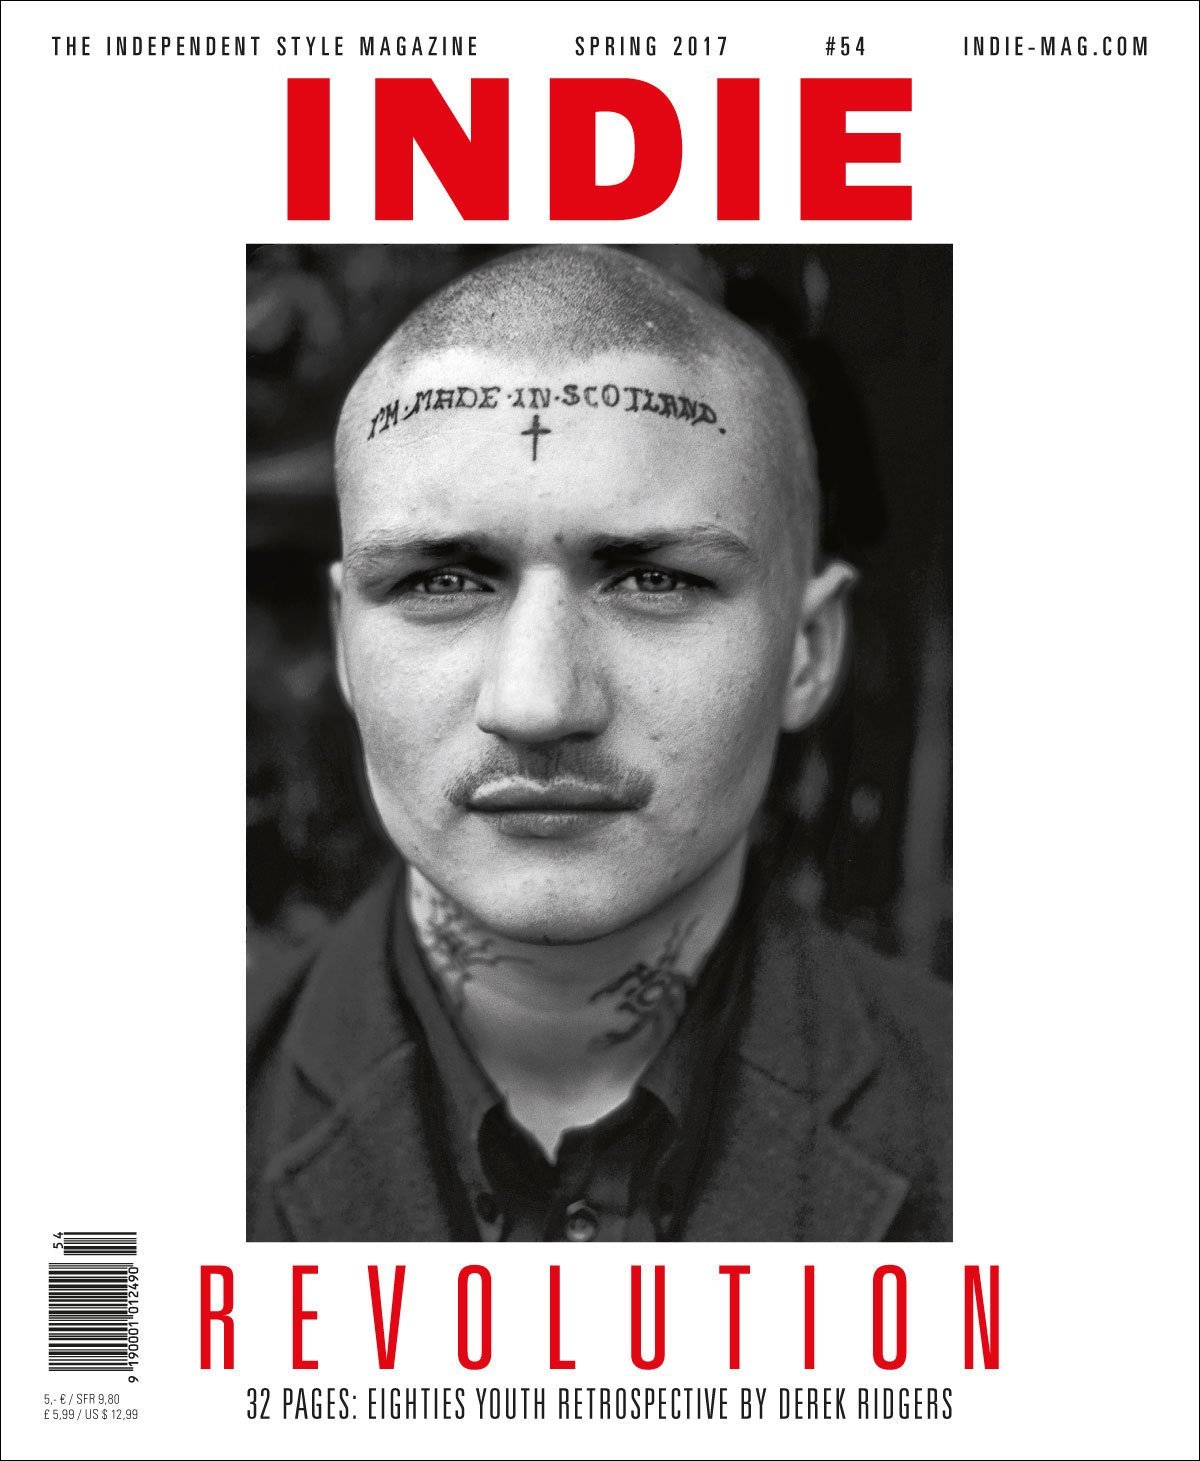 INDIE Digital Issue #54 - Spring 2017 - all 3 Covers (PDF)